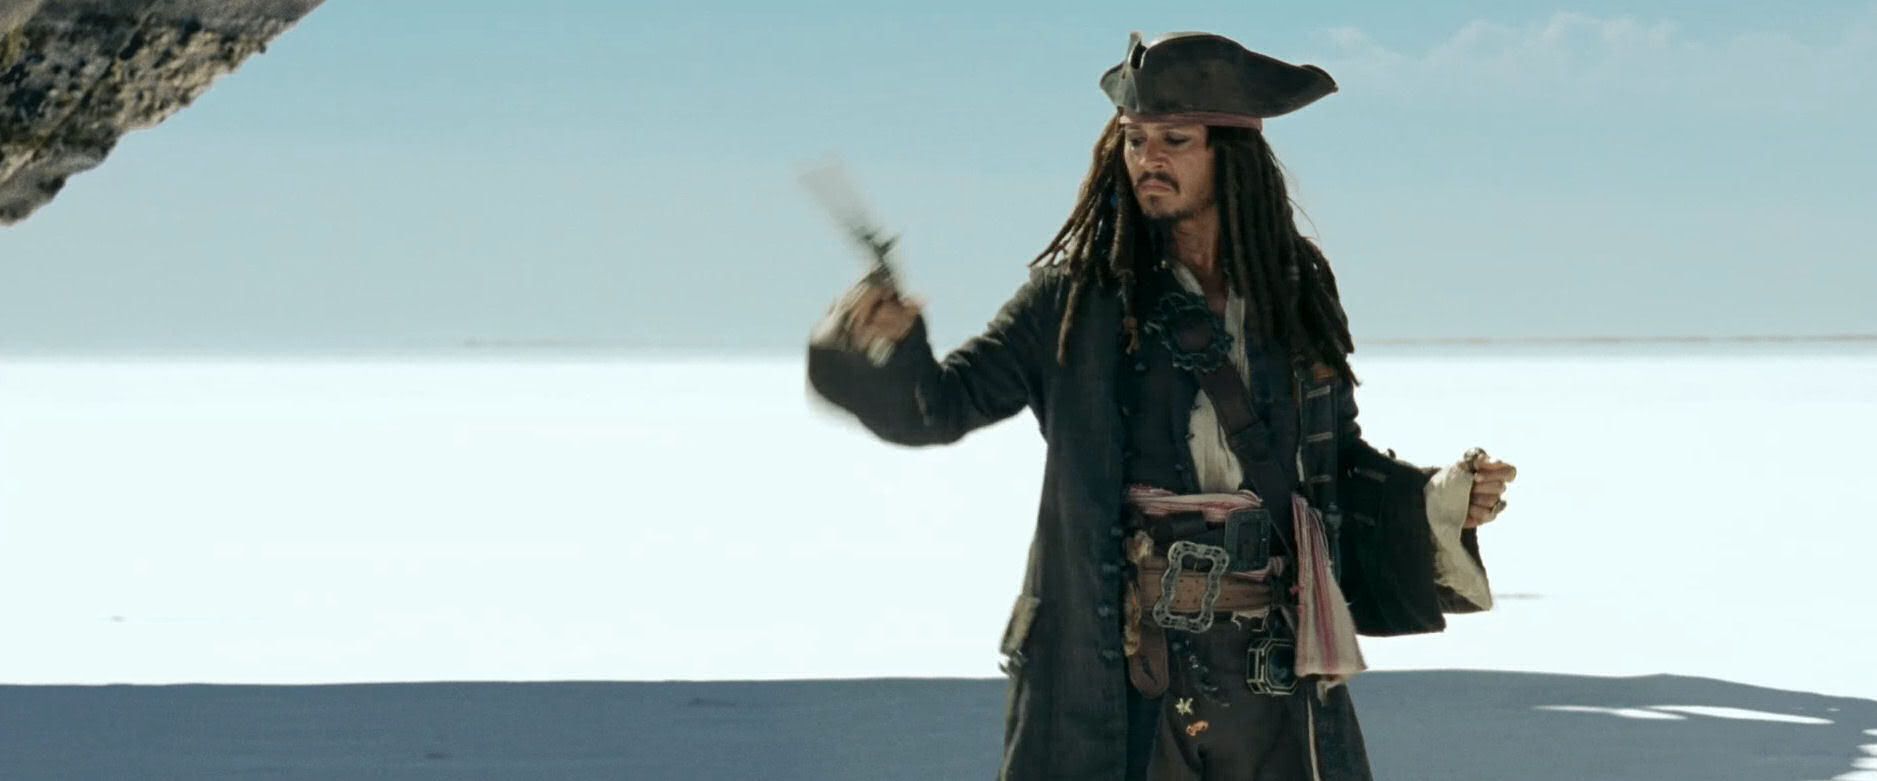 http://i4.photobucket.com/albums/y144/deepintodepp/Pirates%20At%20Worlds%20End/ScreenCaps%20from%20Clips/000000896.jpg